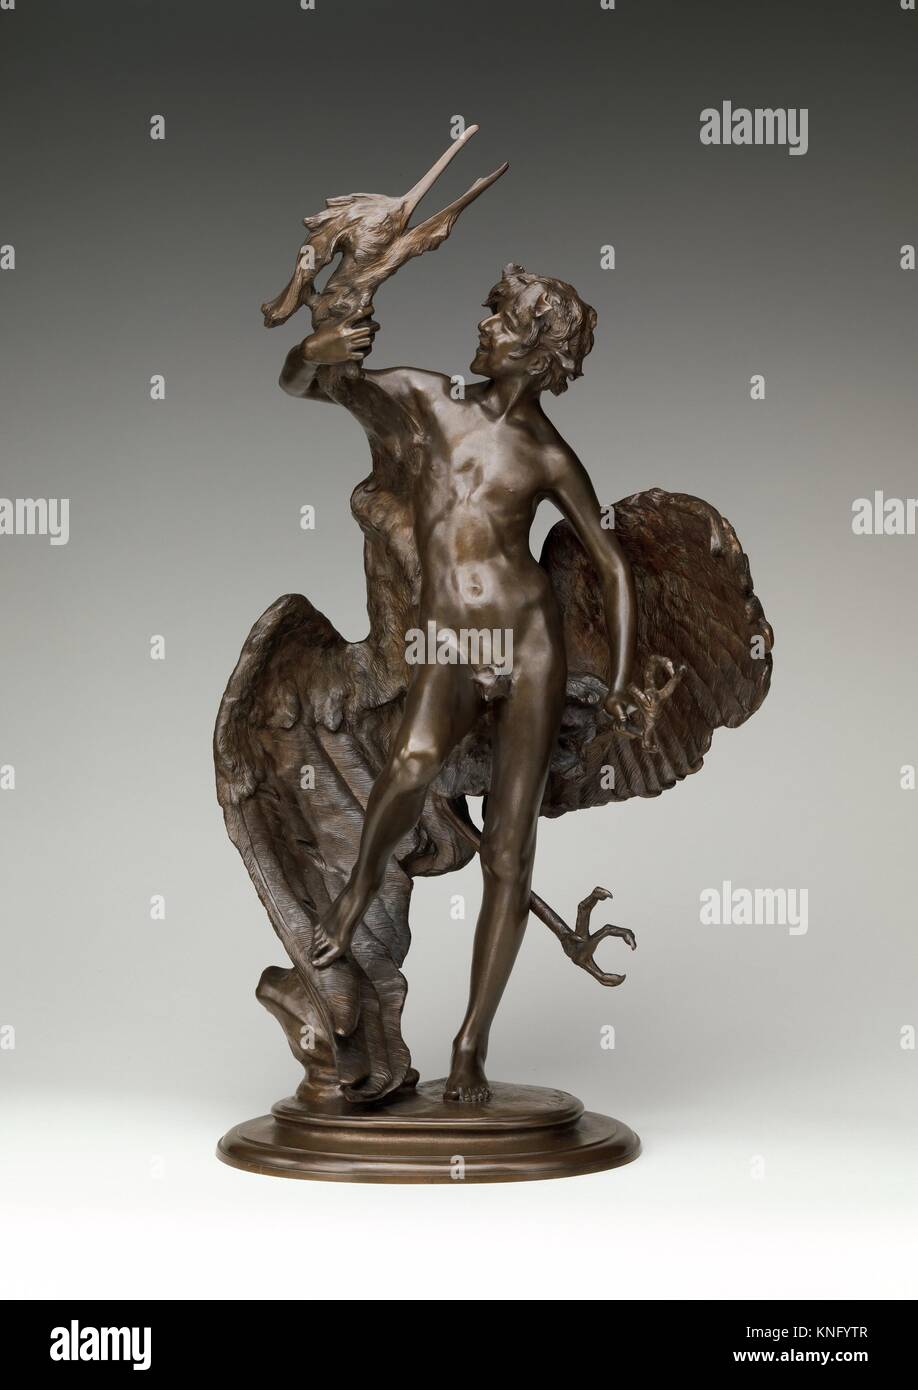 Young Faun with Heron. Artist: Frederick William MacMonnies (American, New York 1863-1937 New York); Date: 1889-90, cast 1890; Medium: Bronze; Stock Photo